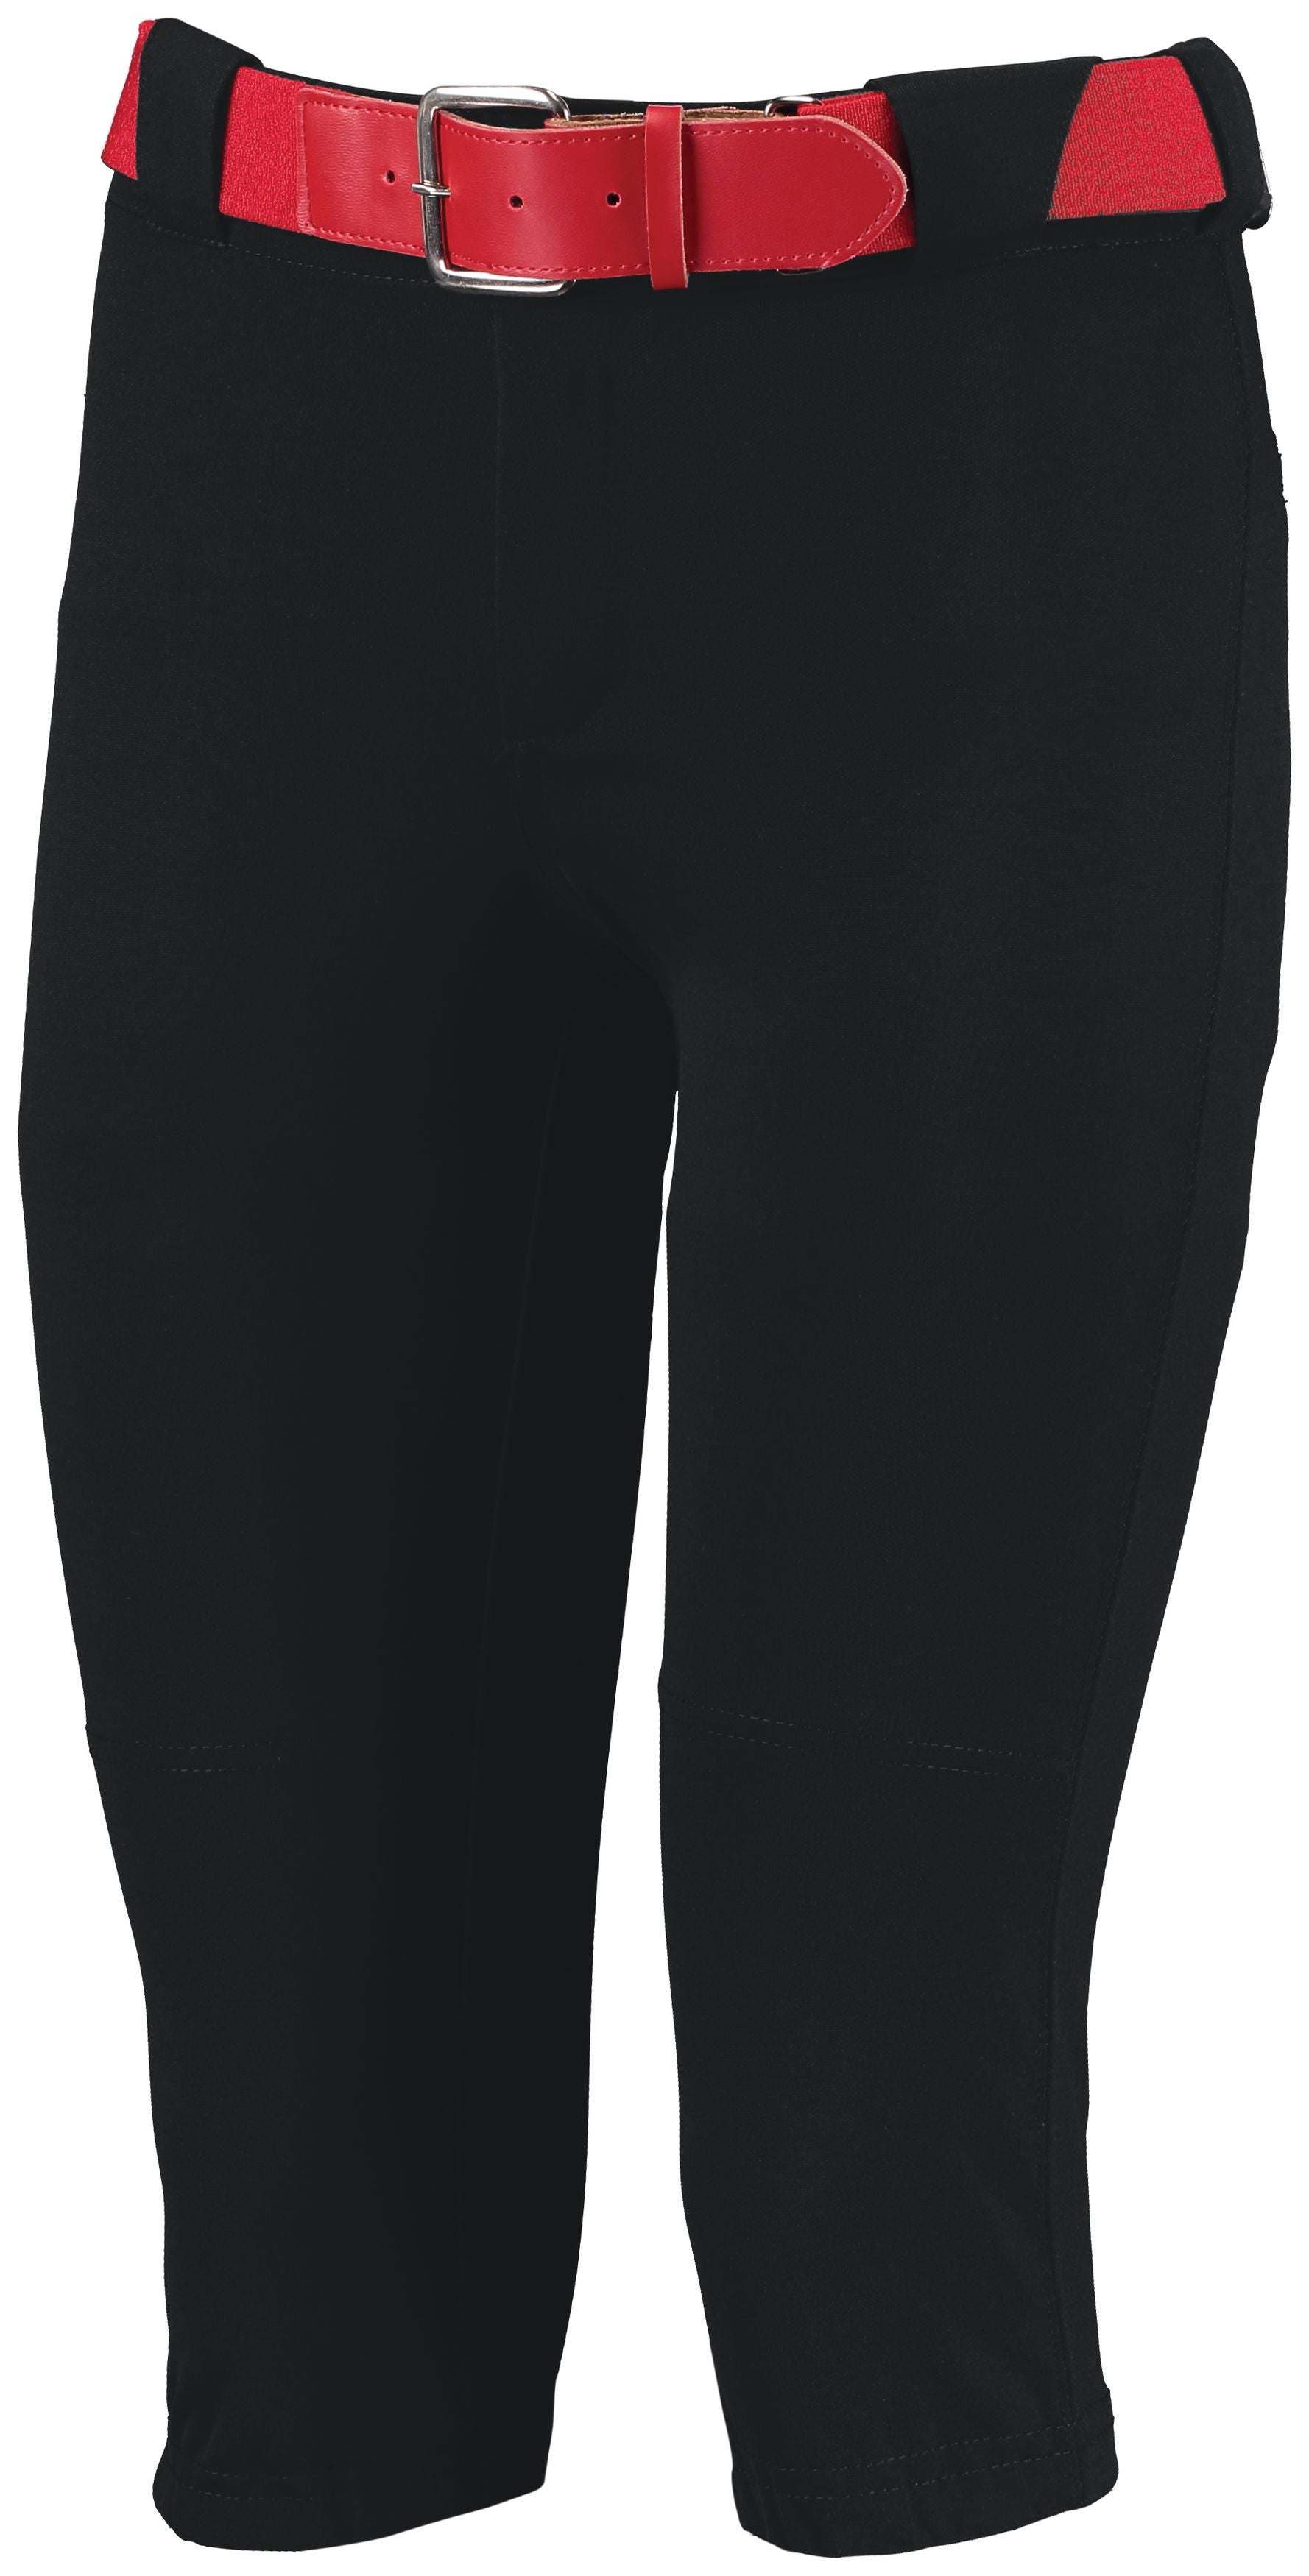 Russell Athletic Ladies Low Rise Knicker Length Pant in Black  -Part of the Ladies, Softball, Russell-Athletic-Products product lines at KanaleyCreations.com